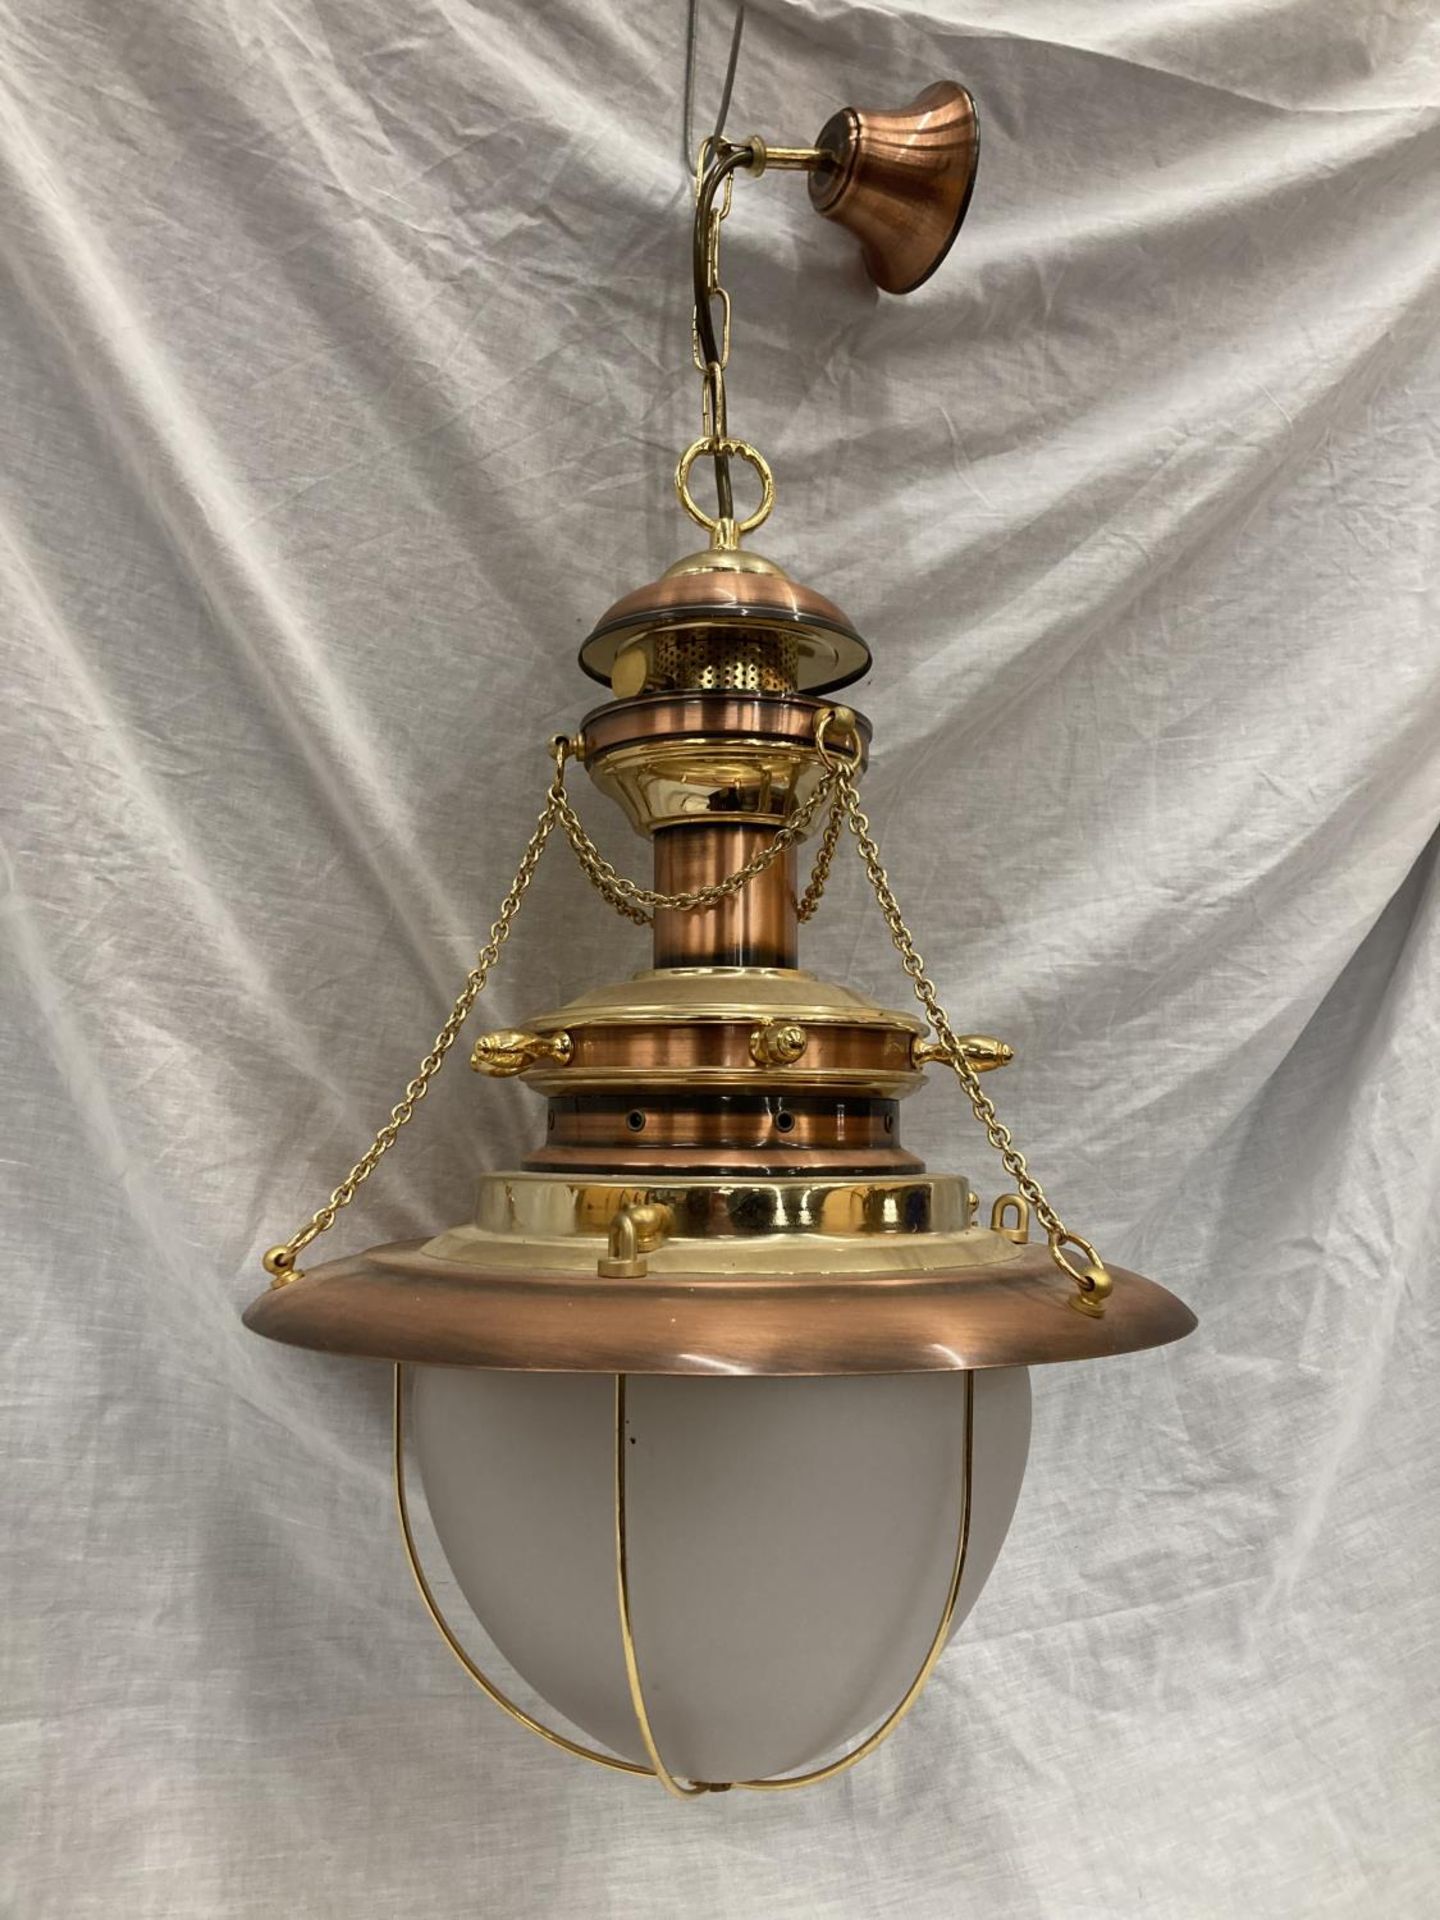 AN UNUSUAL BRASS AND COPPER PENDANT LIGHT WITH DOMED GLASS SHADE, SHIPS WHEEL DESIGN AND CHAINS